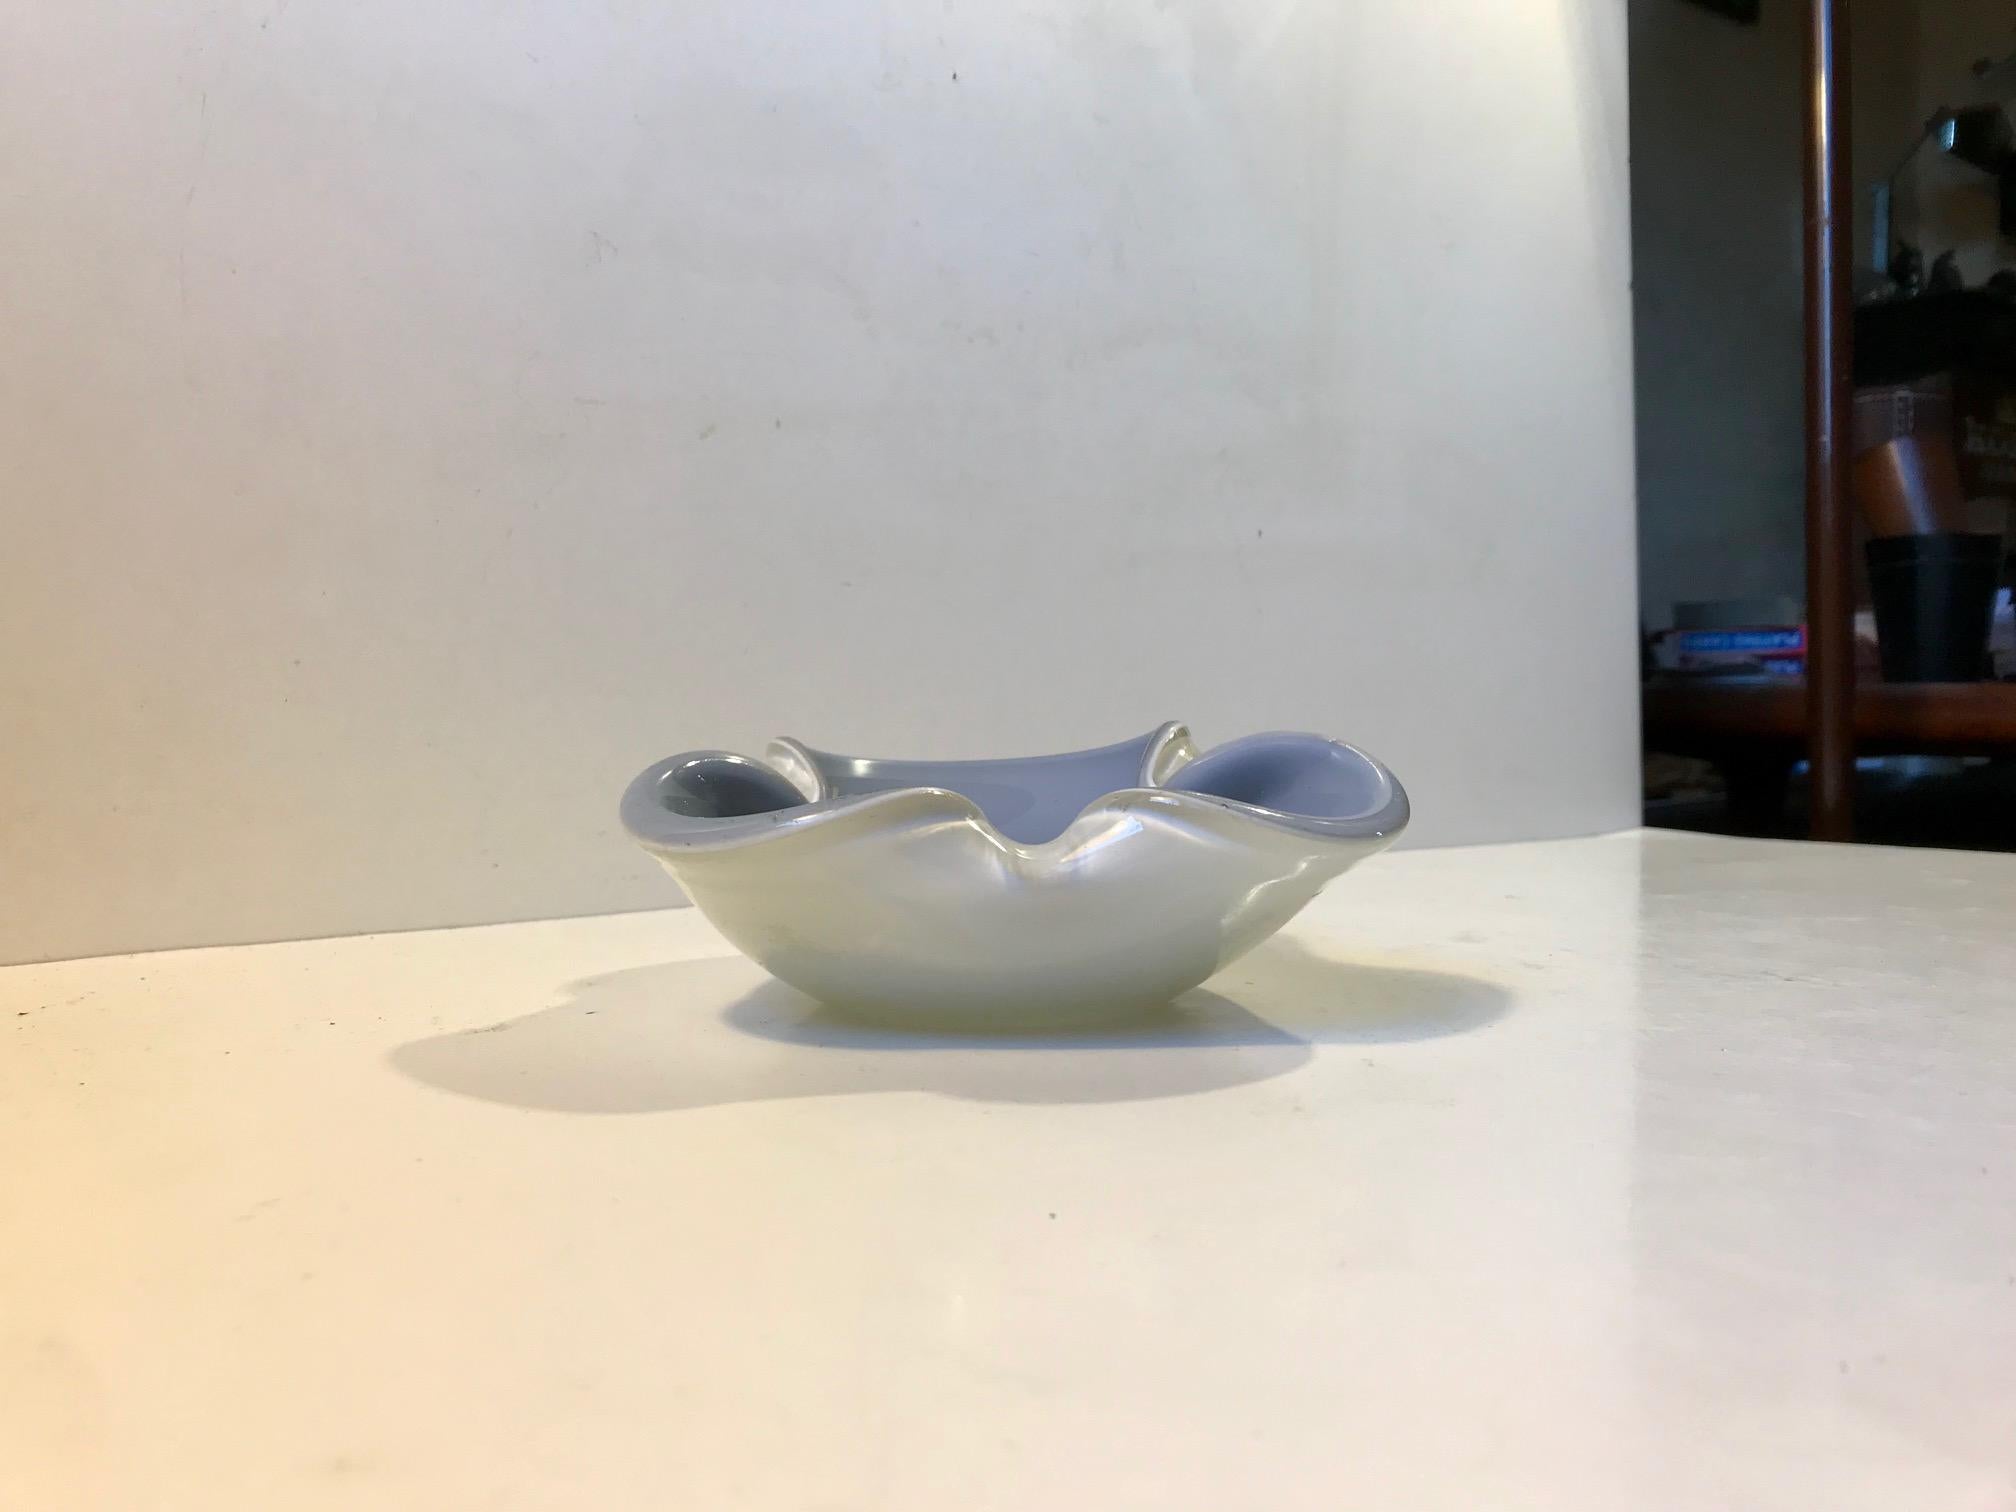 This lavender/white/clear Sommerso collapsed bowl or cigar ashtray was manufactured and designed by Seguso in Murano, Italy during the late 1960s or 70s.